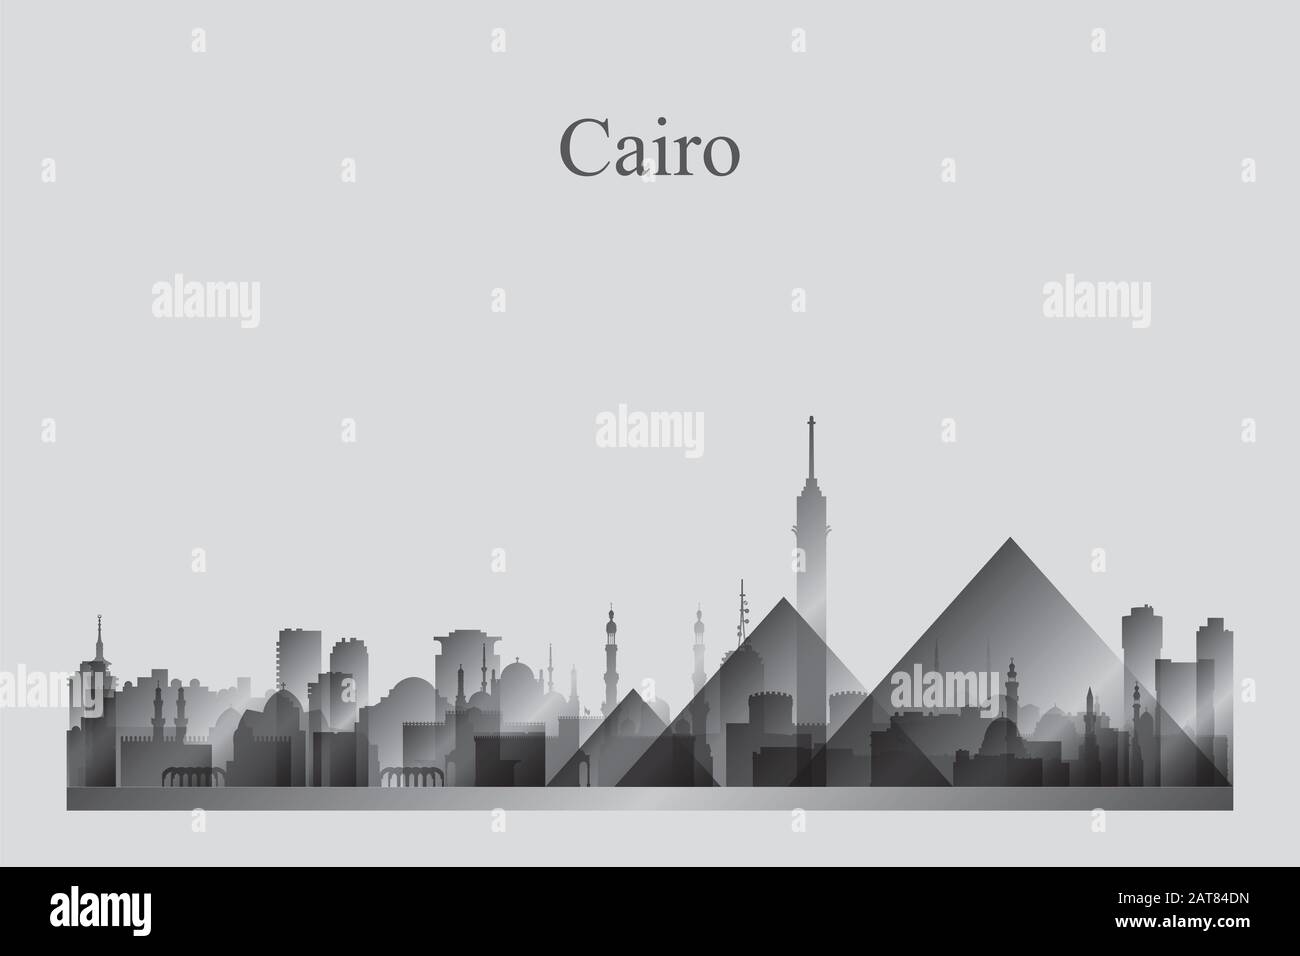 Cairo city skyline silhouette in a grayscale Stock Photo - Alamy